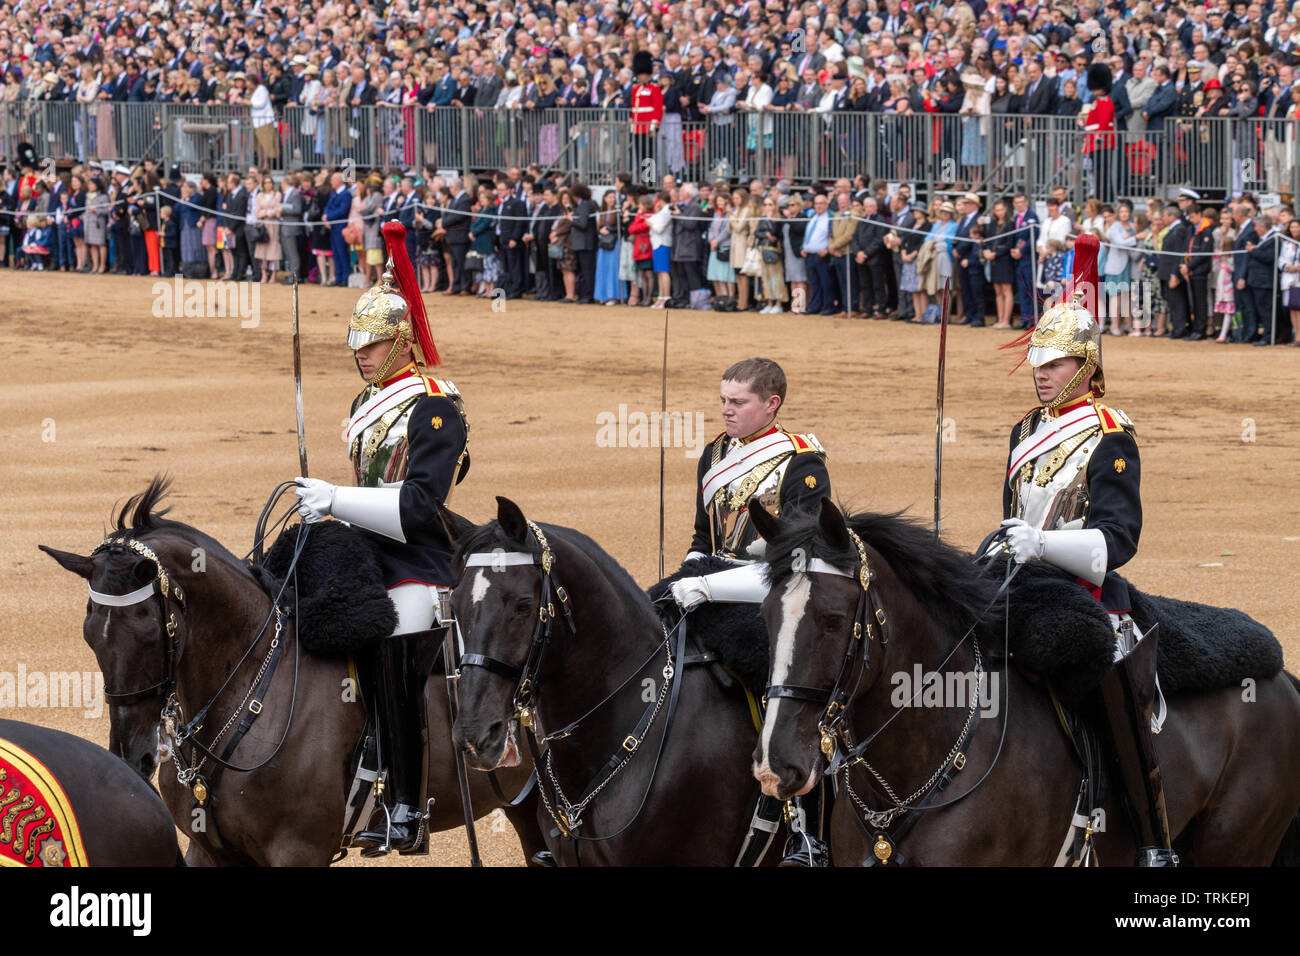 London, UK. 8th June 2019 Trooping the Colour 2019, The Queen's Birthday parade on Horseguards Parade London in the presence of Her Majesty The Queen.  Colour trooped by the 1st Battalion Grenadier Guards A Trooper lost his helmet in the melee of horses when a Guards officer came off his horse Credit Ian Davidson/Alamy Live News Stock Photo